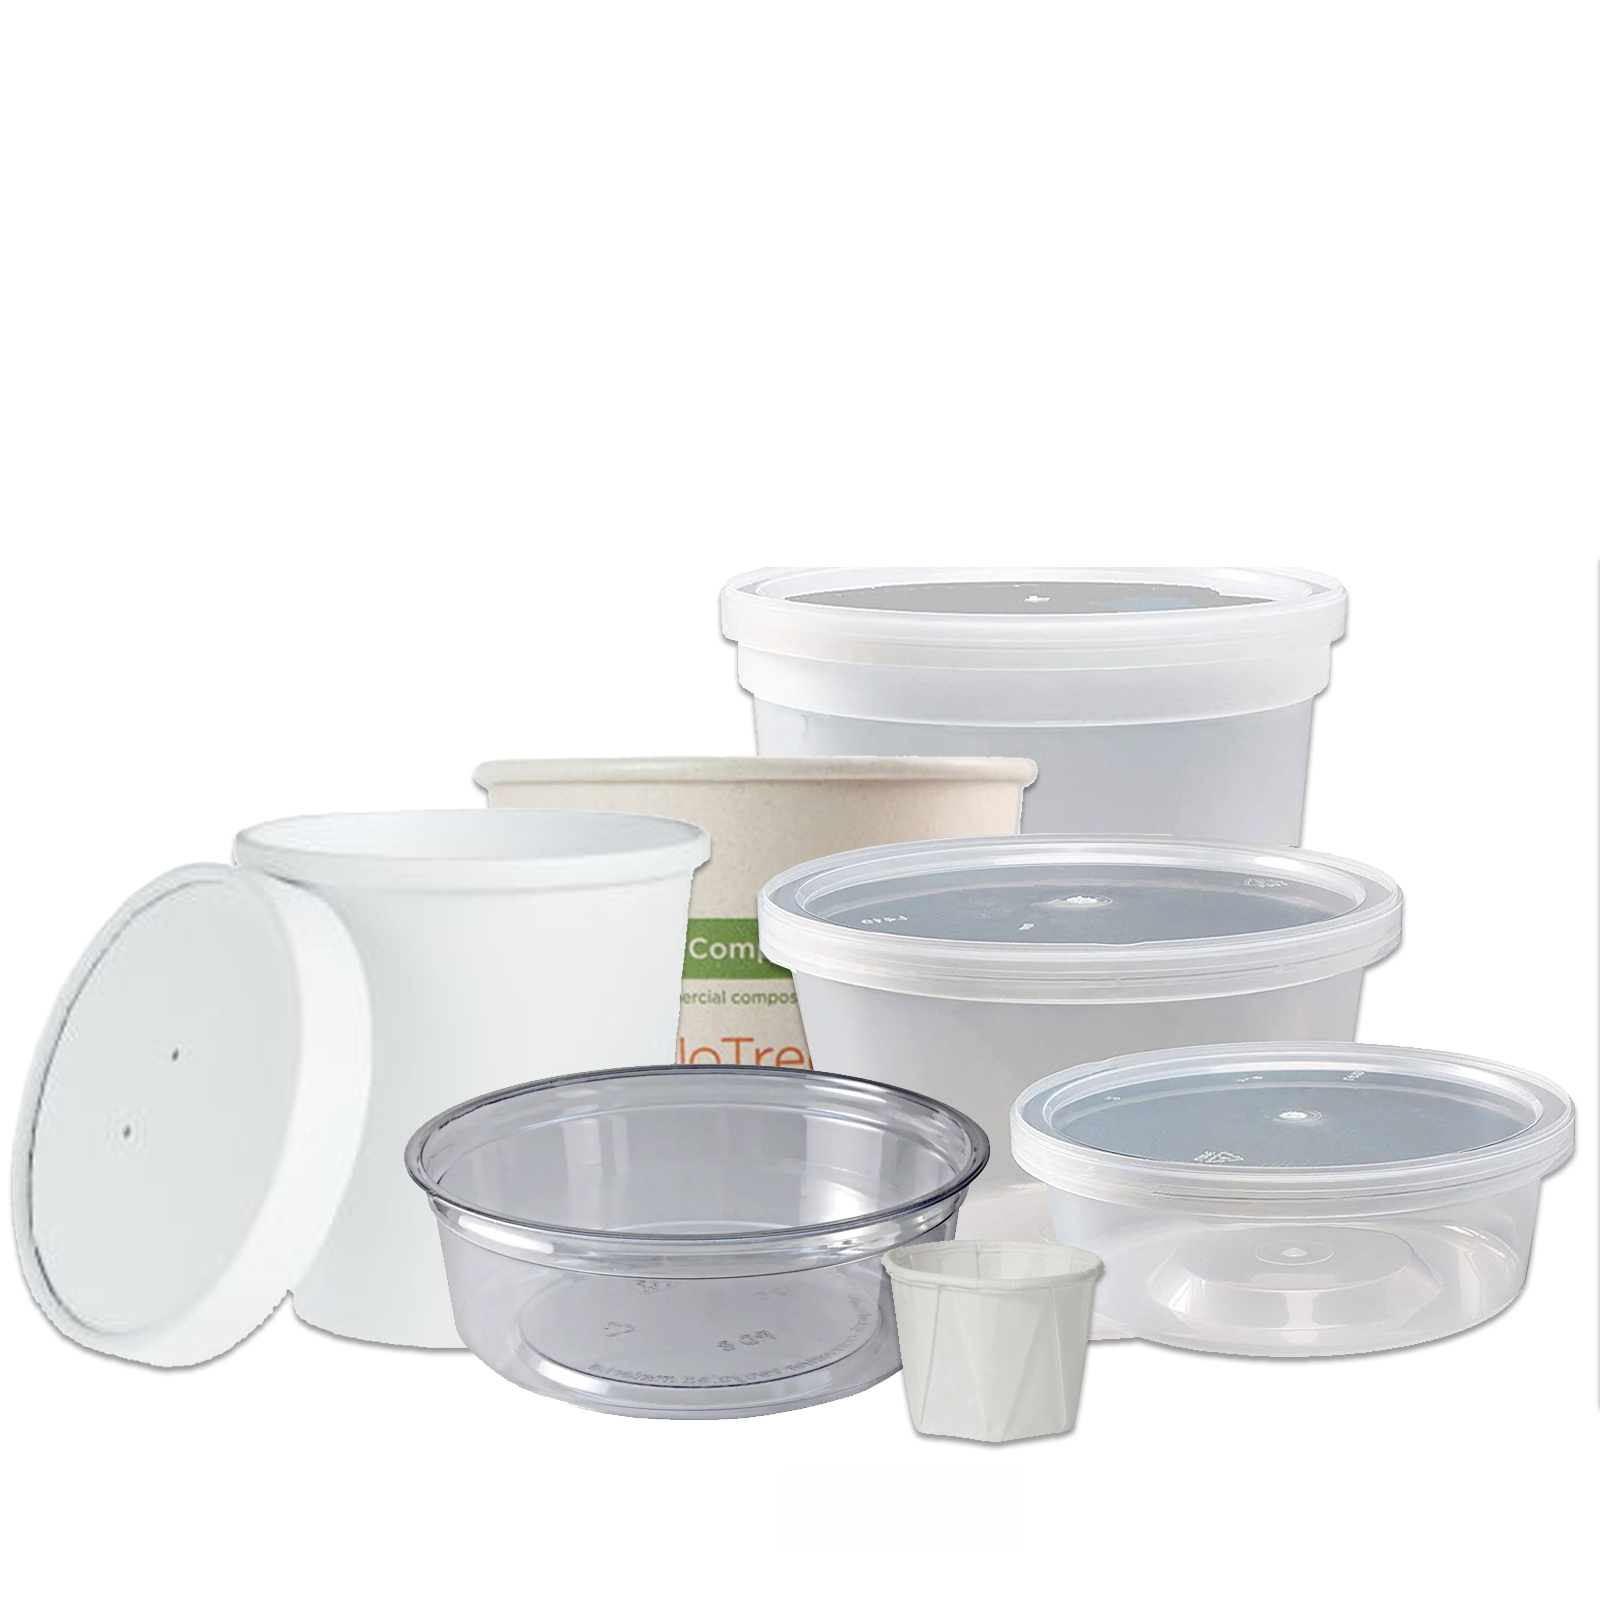 32 oz Capacity, 5 5/16 in Ht, Disposable Carry-Out Soup Container